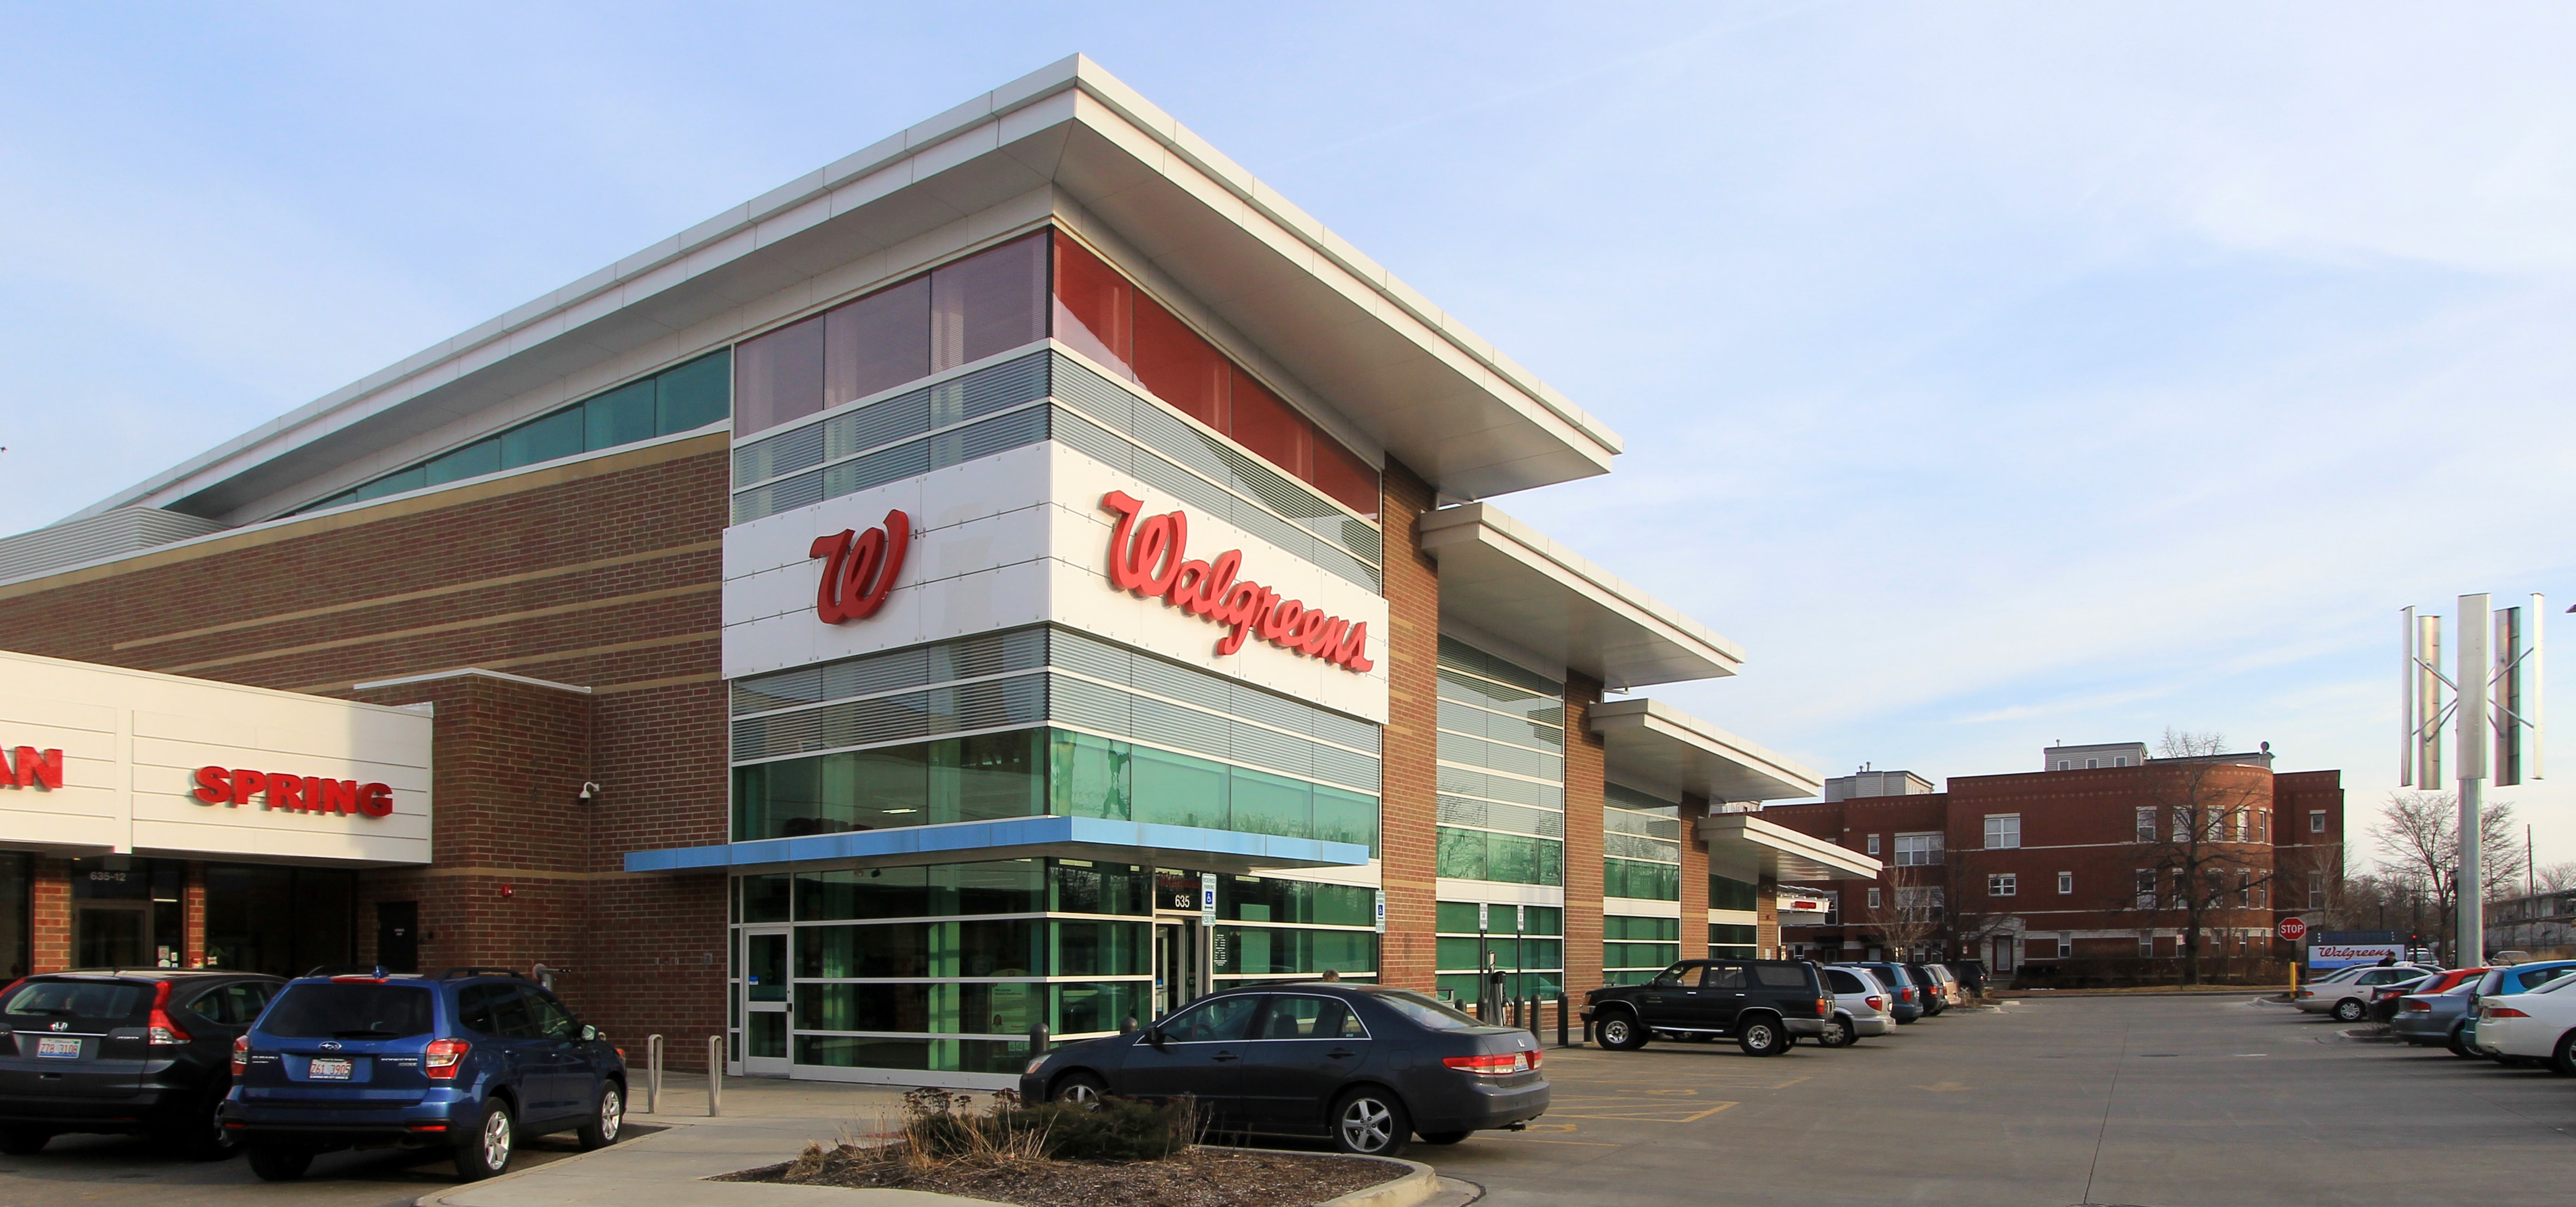 walgreens-recalls-pain-and-itch-cream-over-poisoning-risk-daily-hornet-breaking-news-that